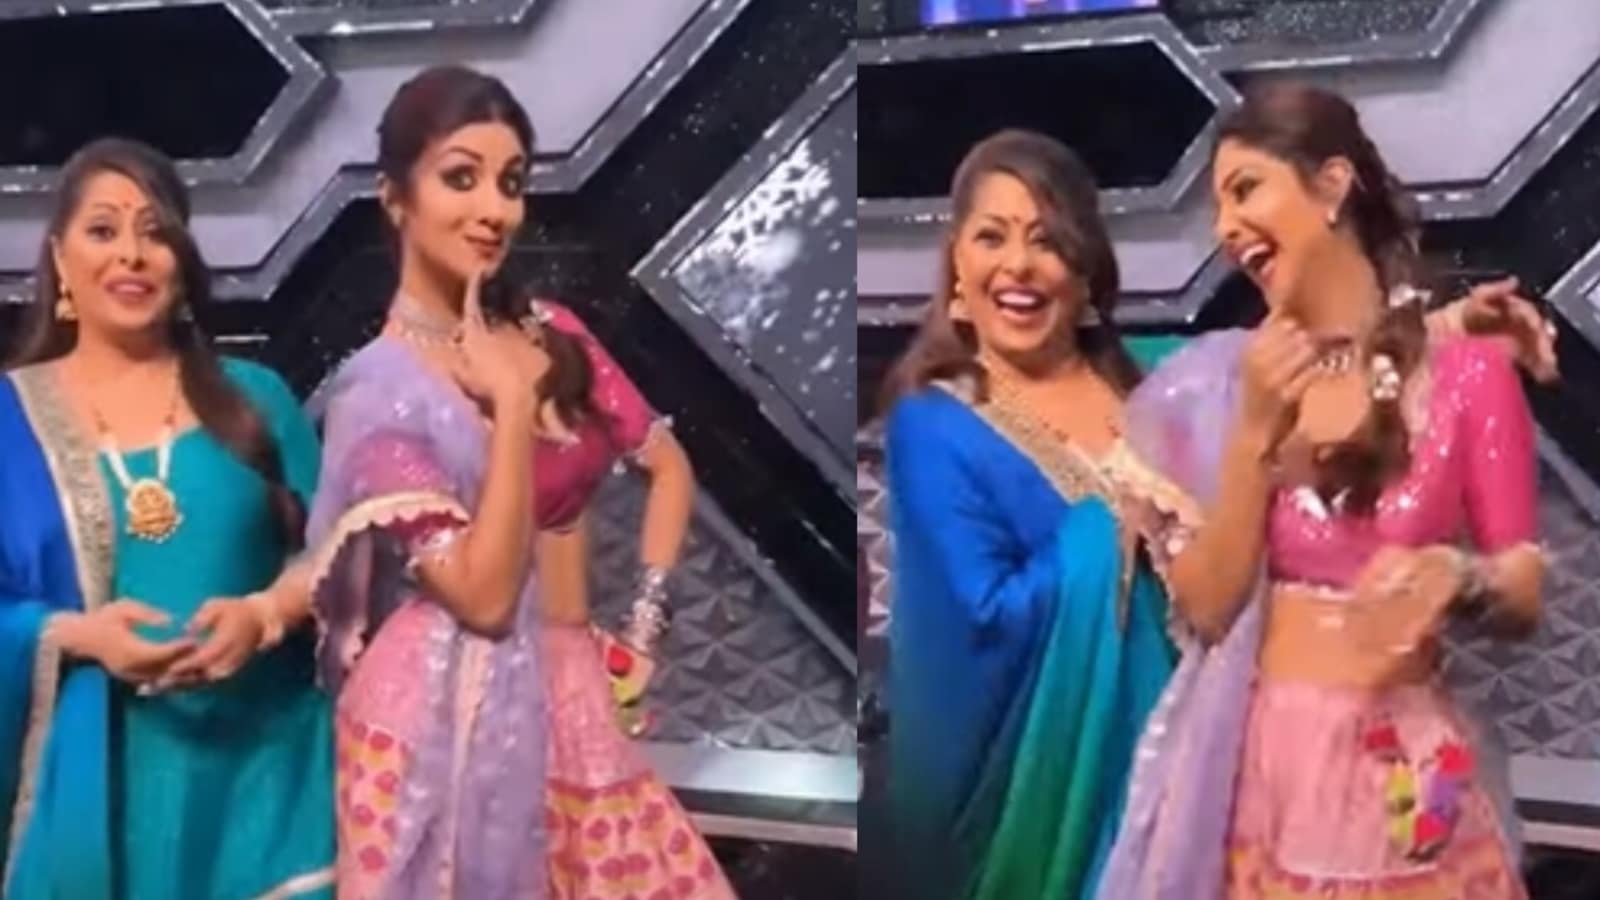 Madhuri Dixitxxx Bf Vide - Shilpa Shetty bursts into laughs as she dances to Manike Mage Hithe with  Geeta Kapur, watch | Bollywood - Hindustan Times